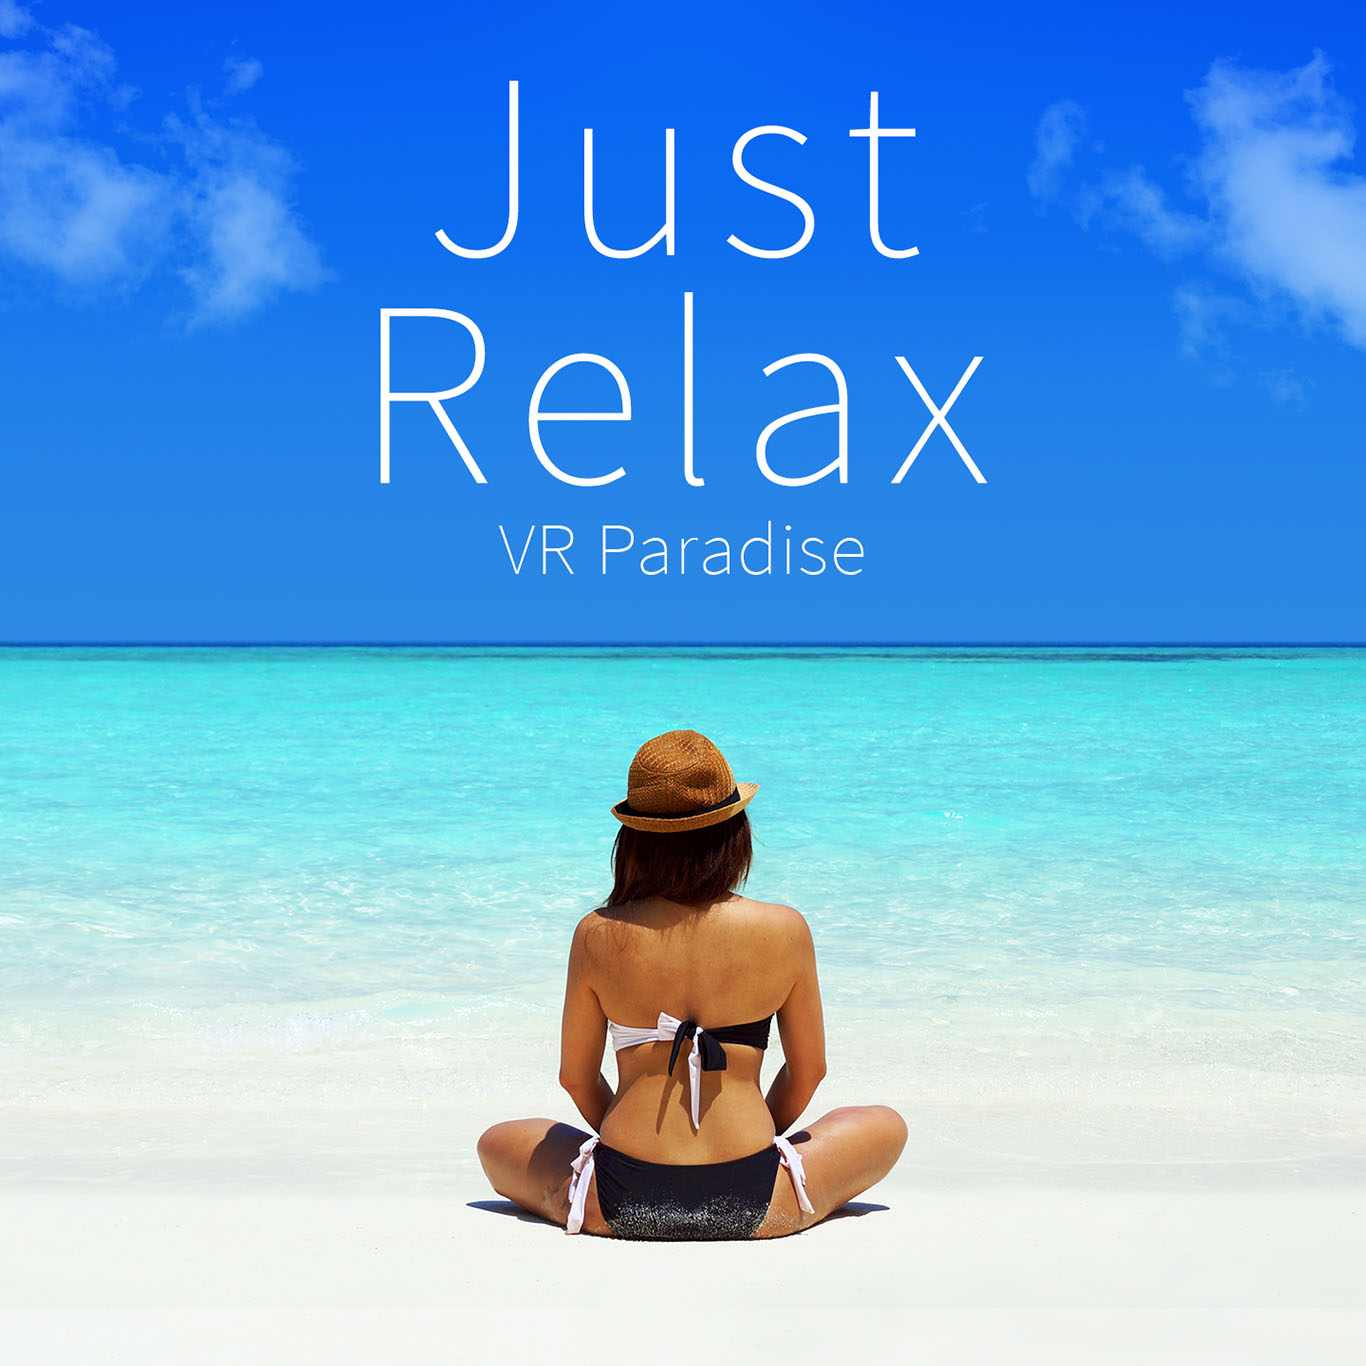 Just Relax (relaxation GearVR app) inter-review